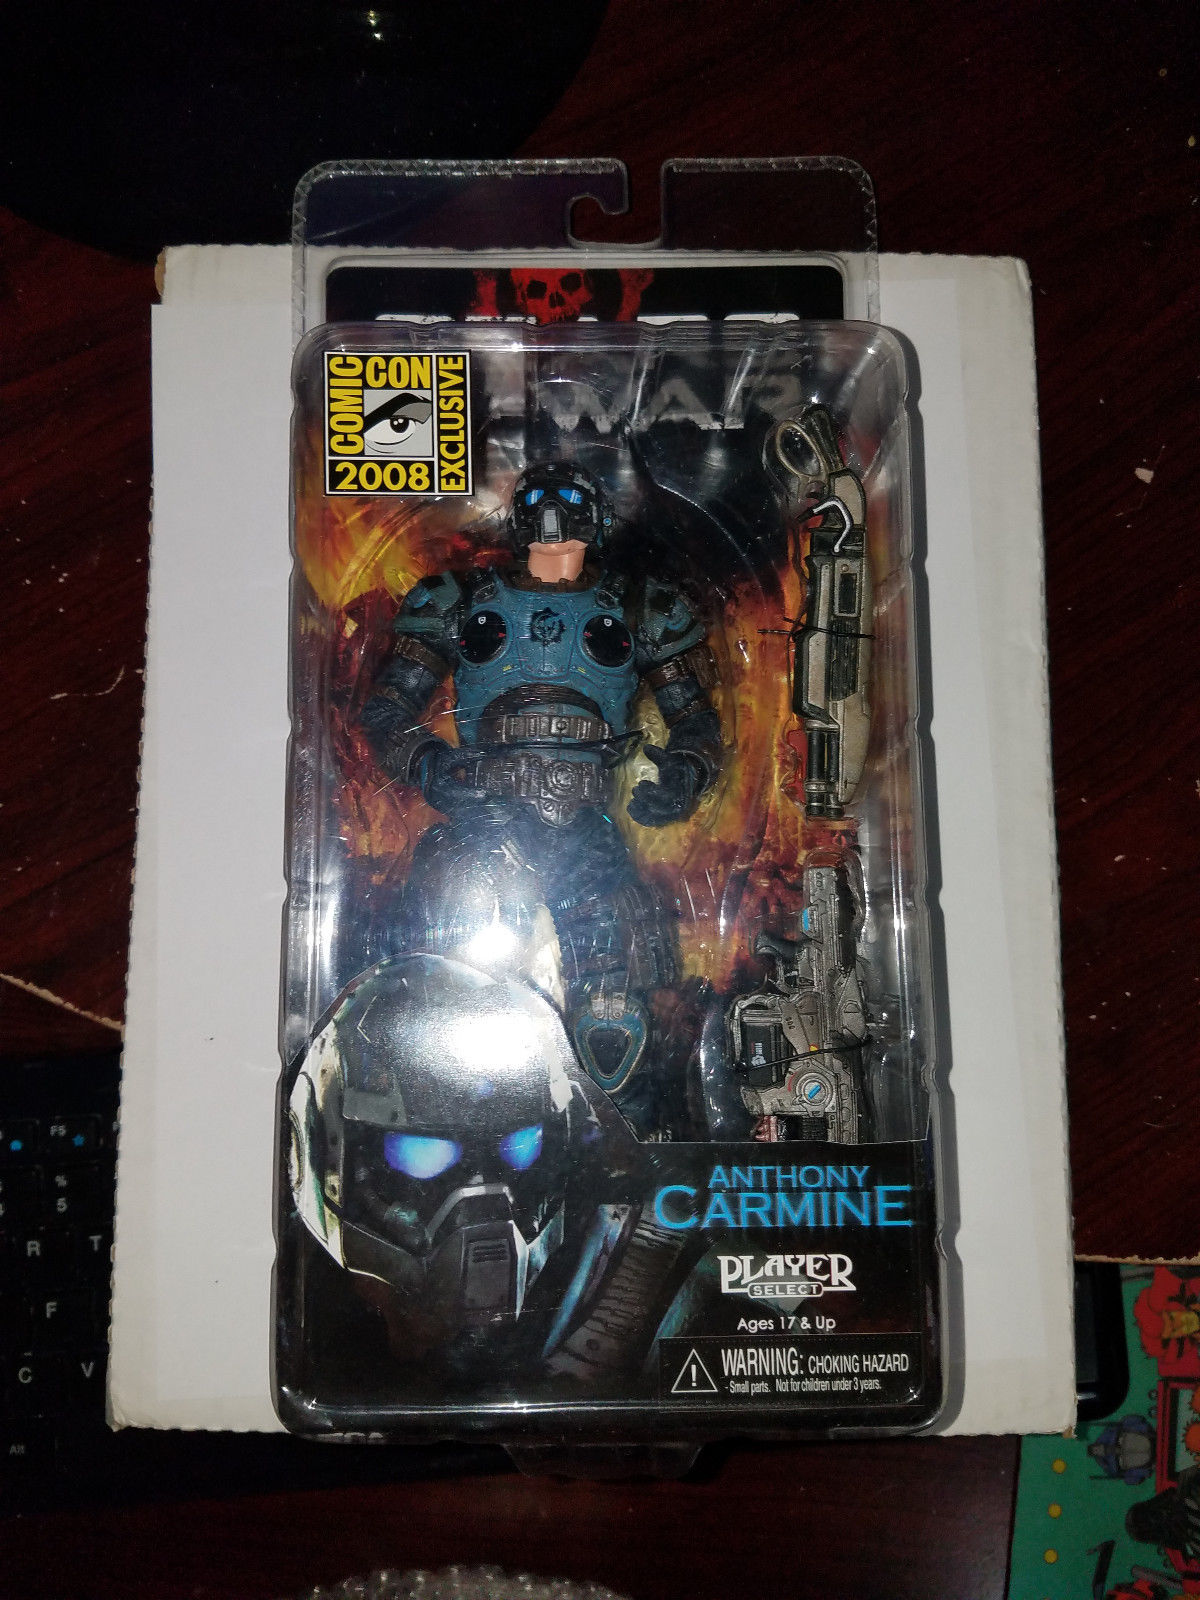 Anthony Carmine Gears Of War Player Select 2008 Comic Con Exclusive Figure